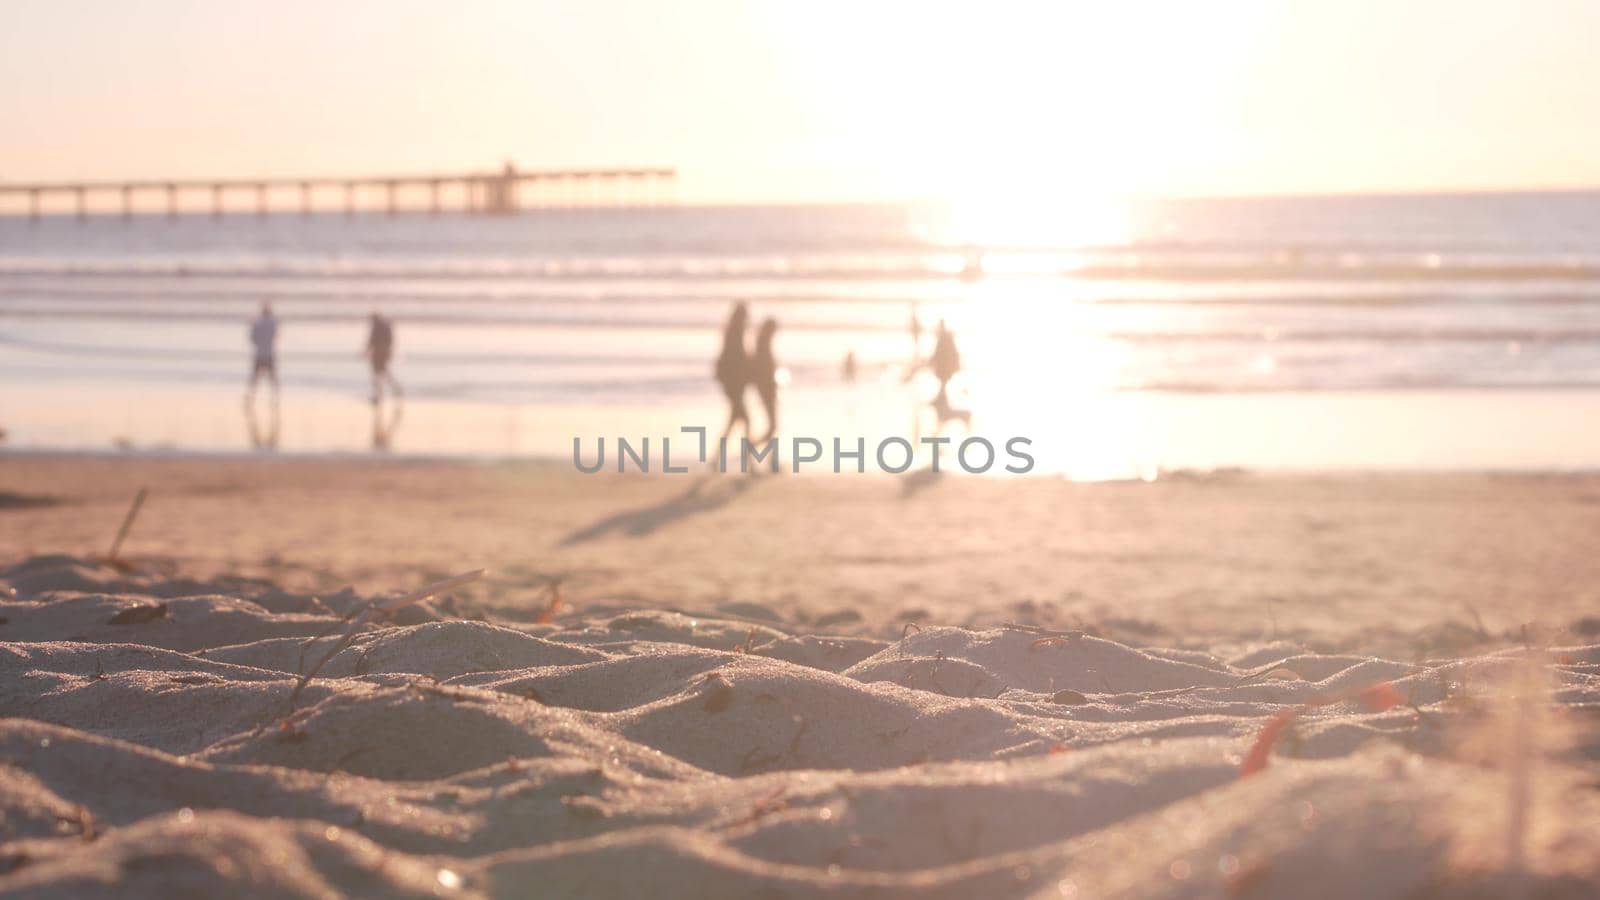 People walking on sandy Ocean Beach by pier at sunset, California coast, USA. Unrecognizable defocused family silhouettes in bright sun light, vacations on shorein sunshine. Sunlit sea water waves.